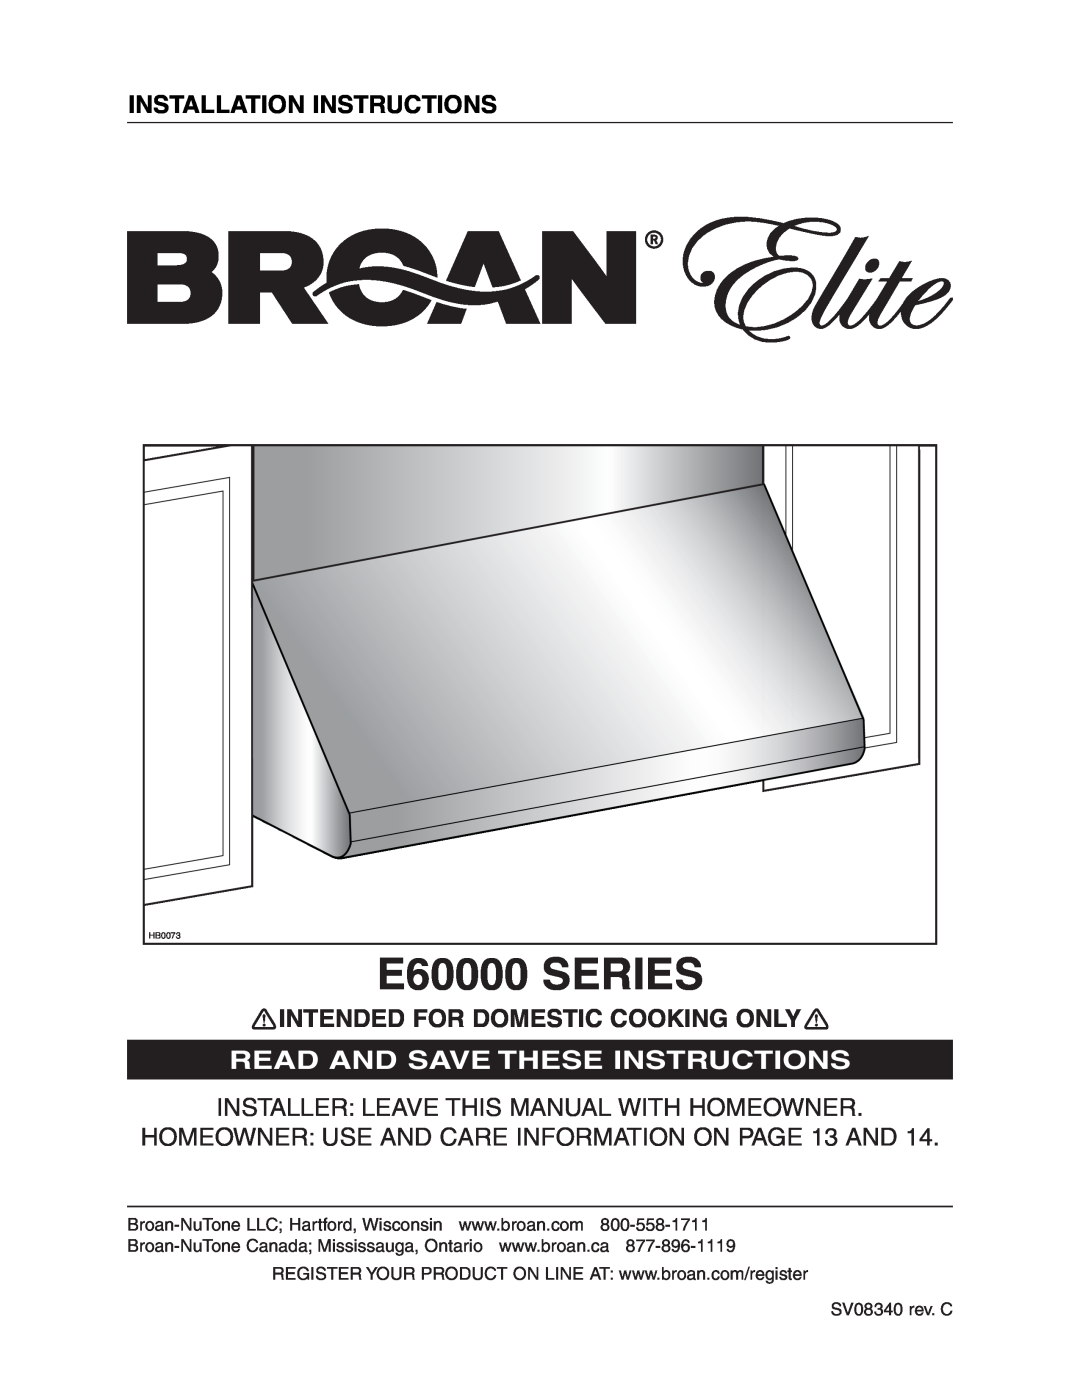 Broan E6030SS installation instructions E60000 SERIES, Installation Instructions, Intended For Domestic Cooking Only 